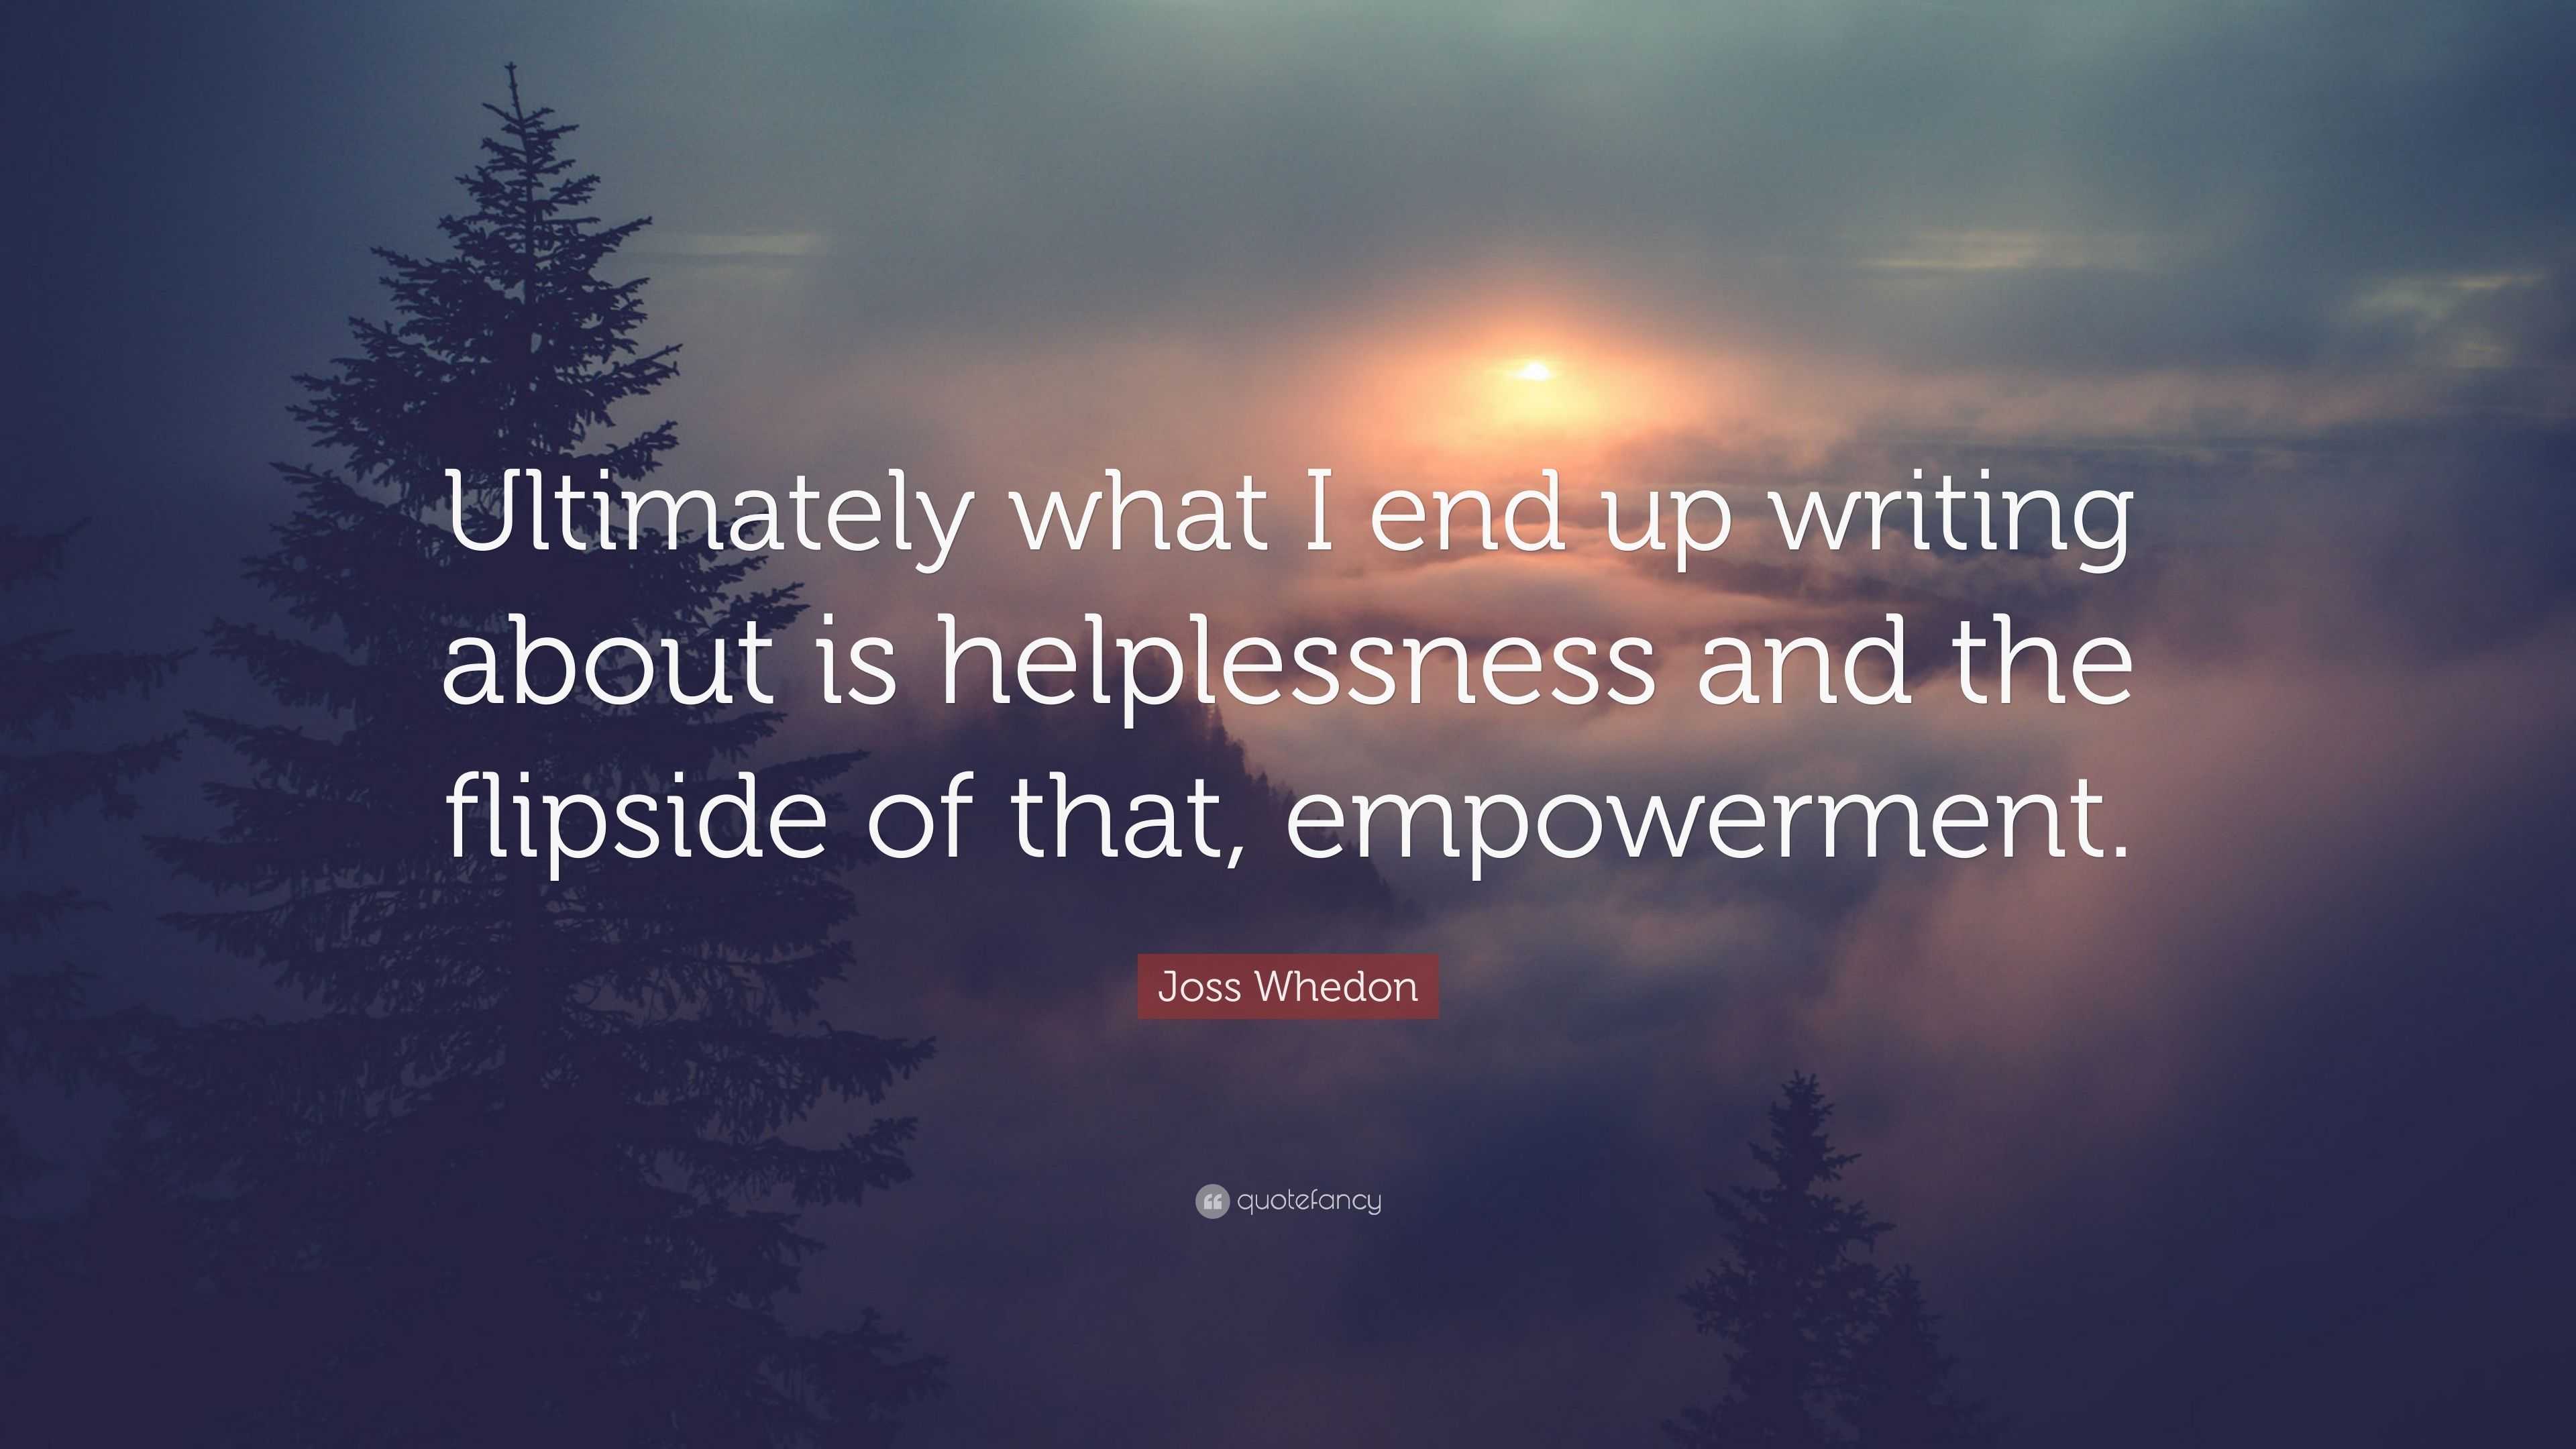 Joss Whedon Quote Ultimately What I End Up Writing About Is Helplessness And The Flipside Of